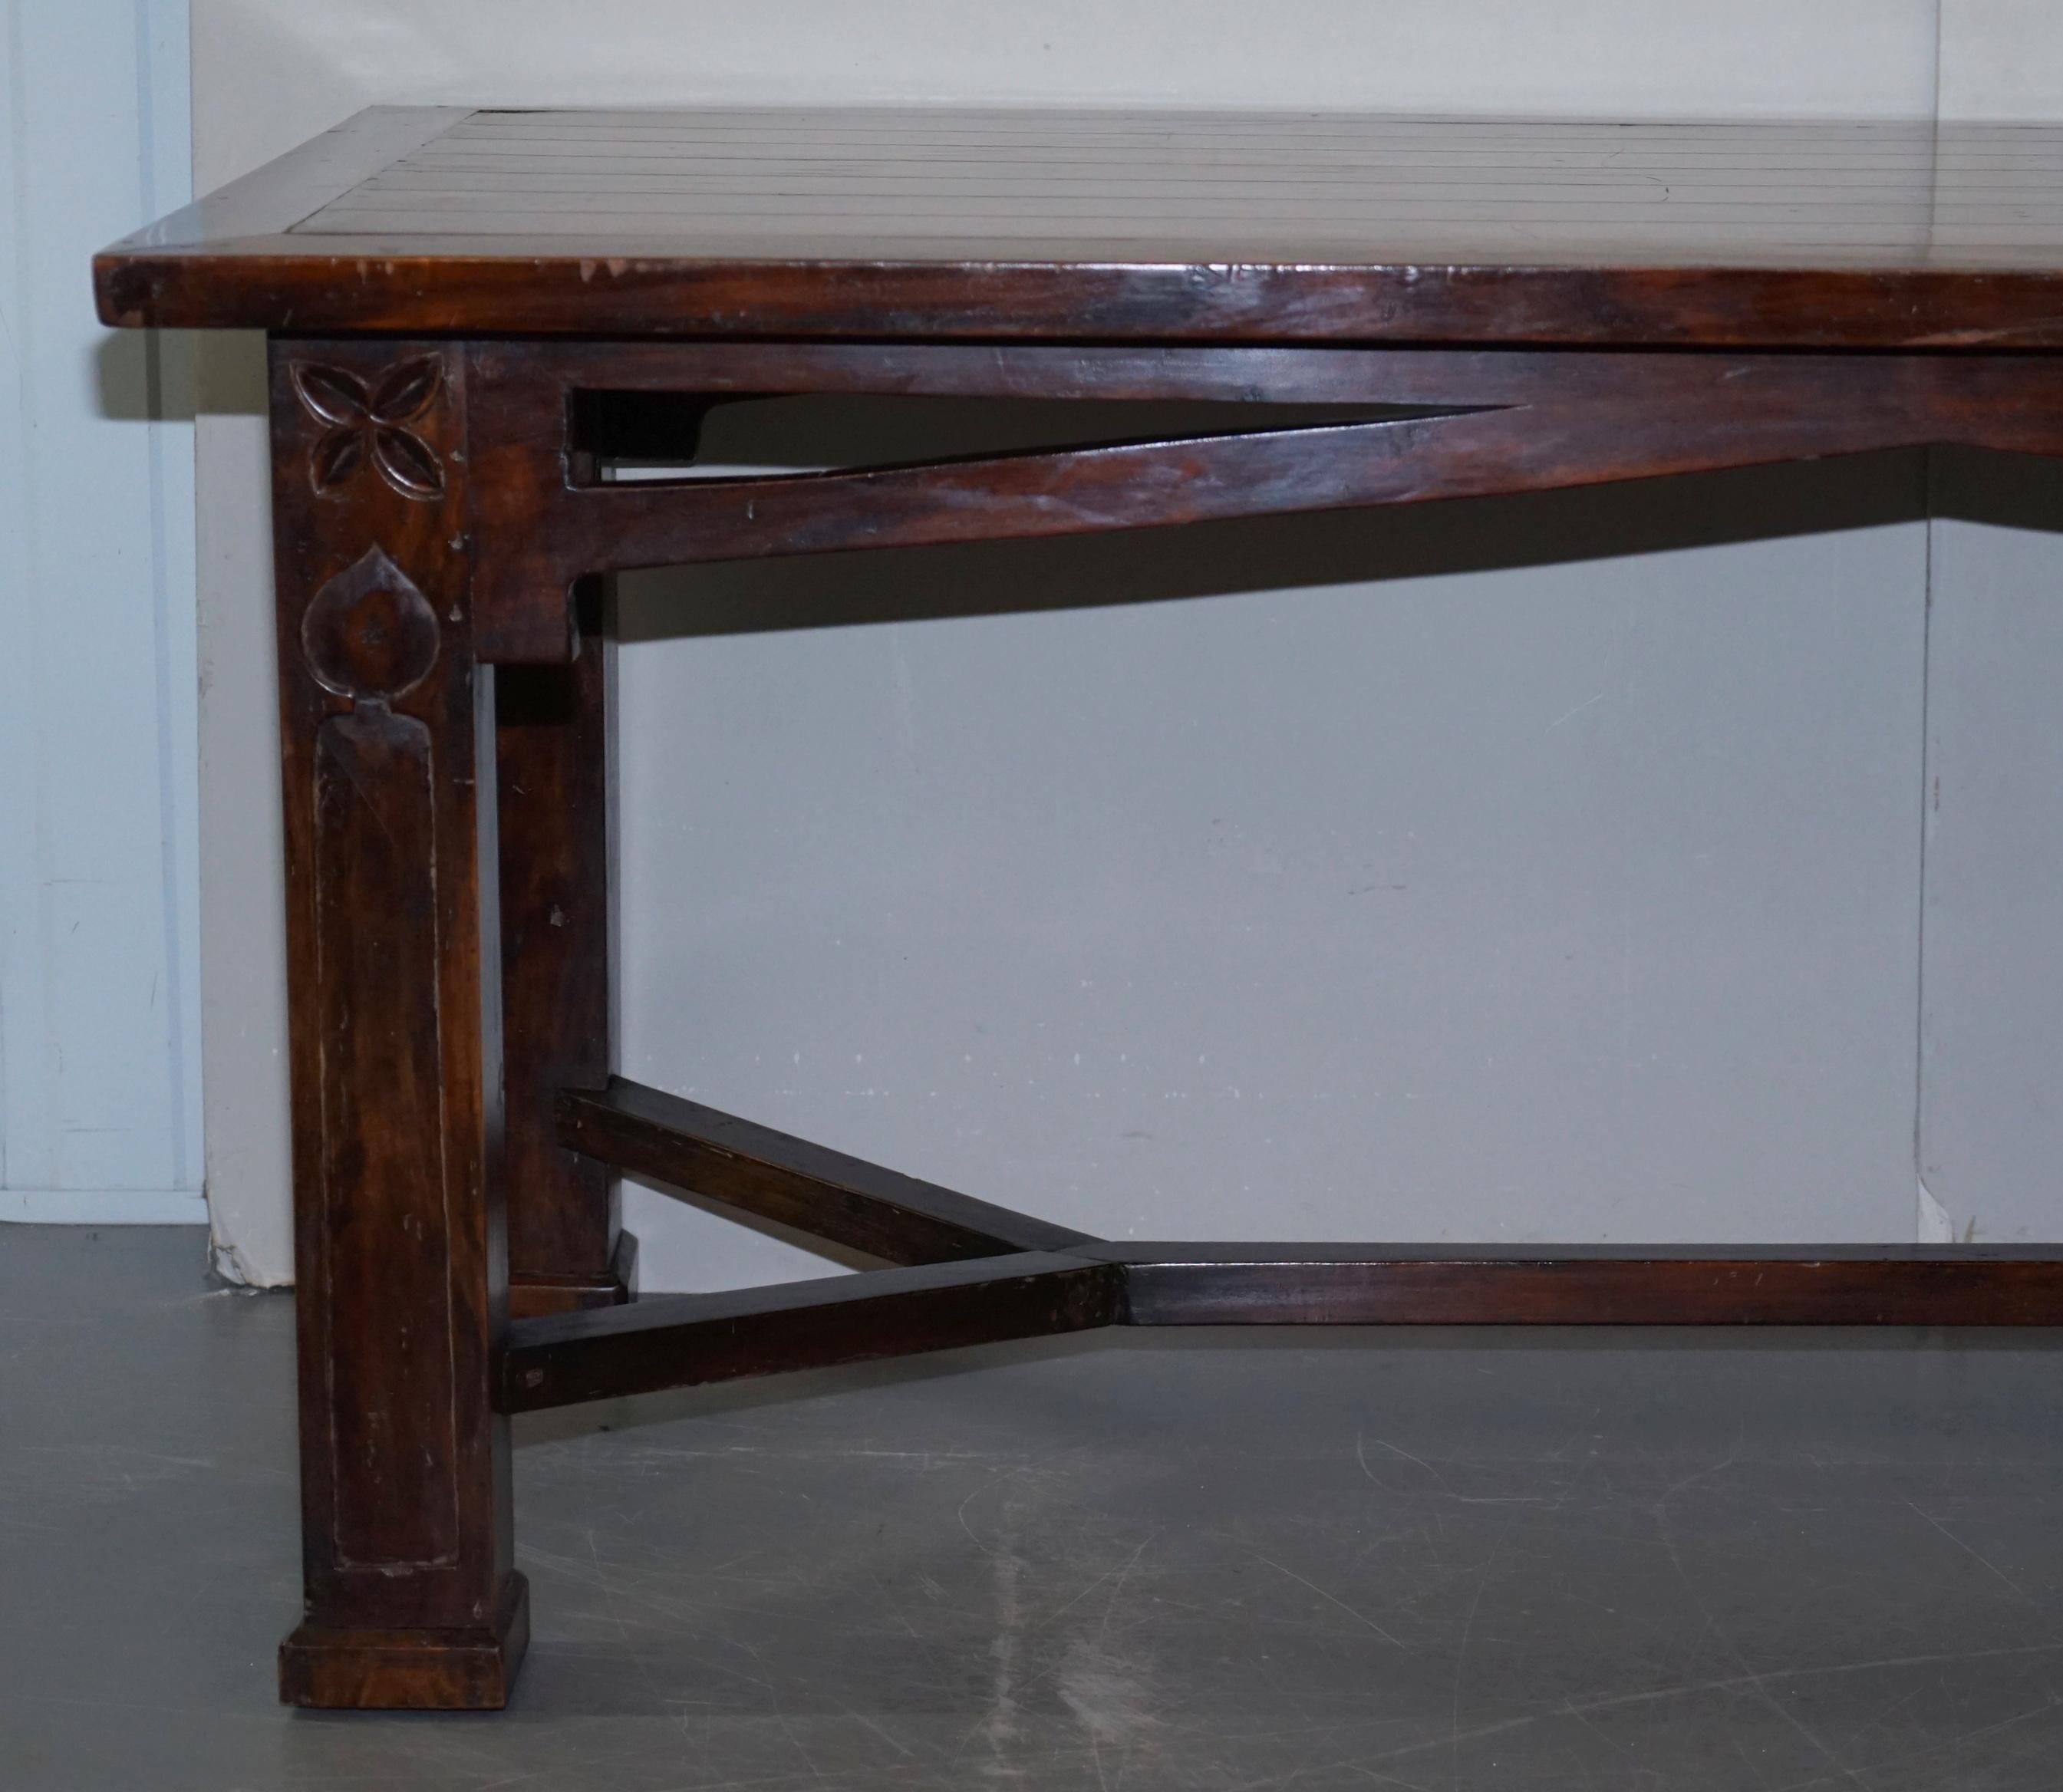 Vintage Art Nouveau Refectory Hayrake Dining Table with Beautiful Carved Legs For Sale 4